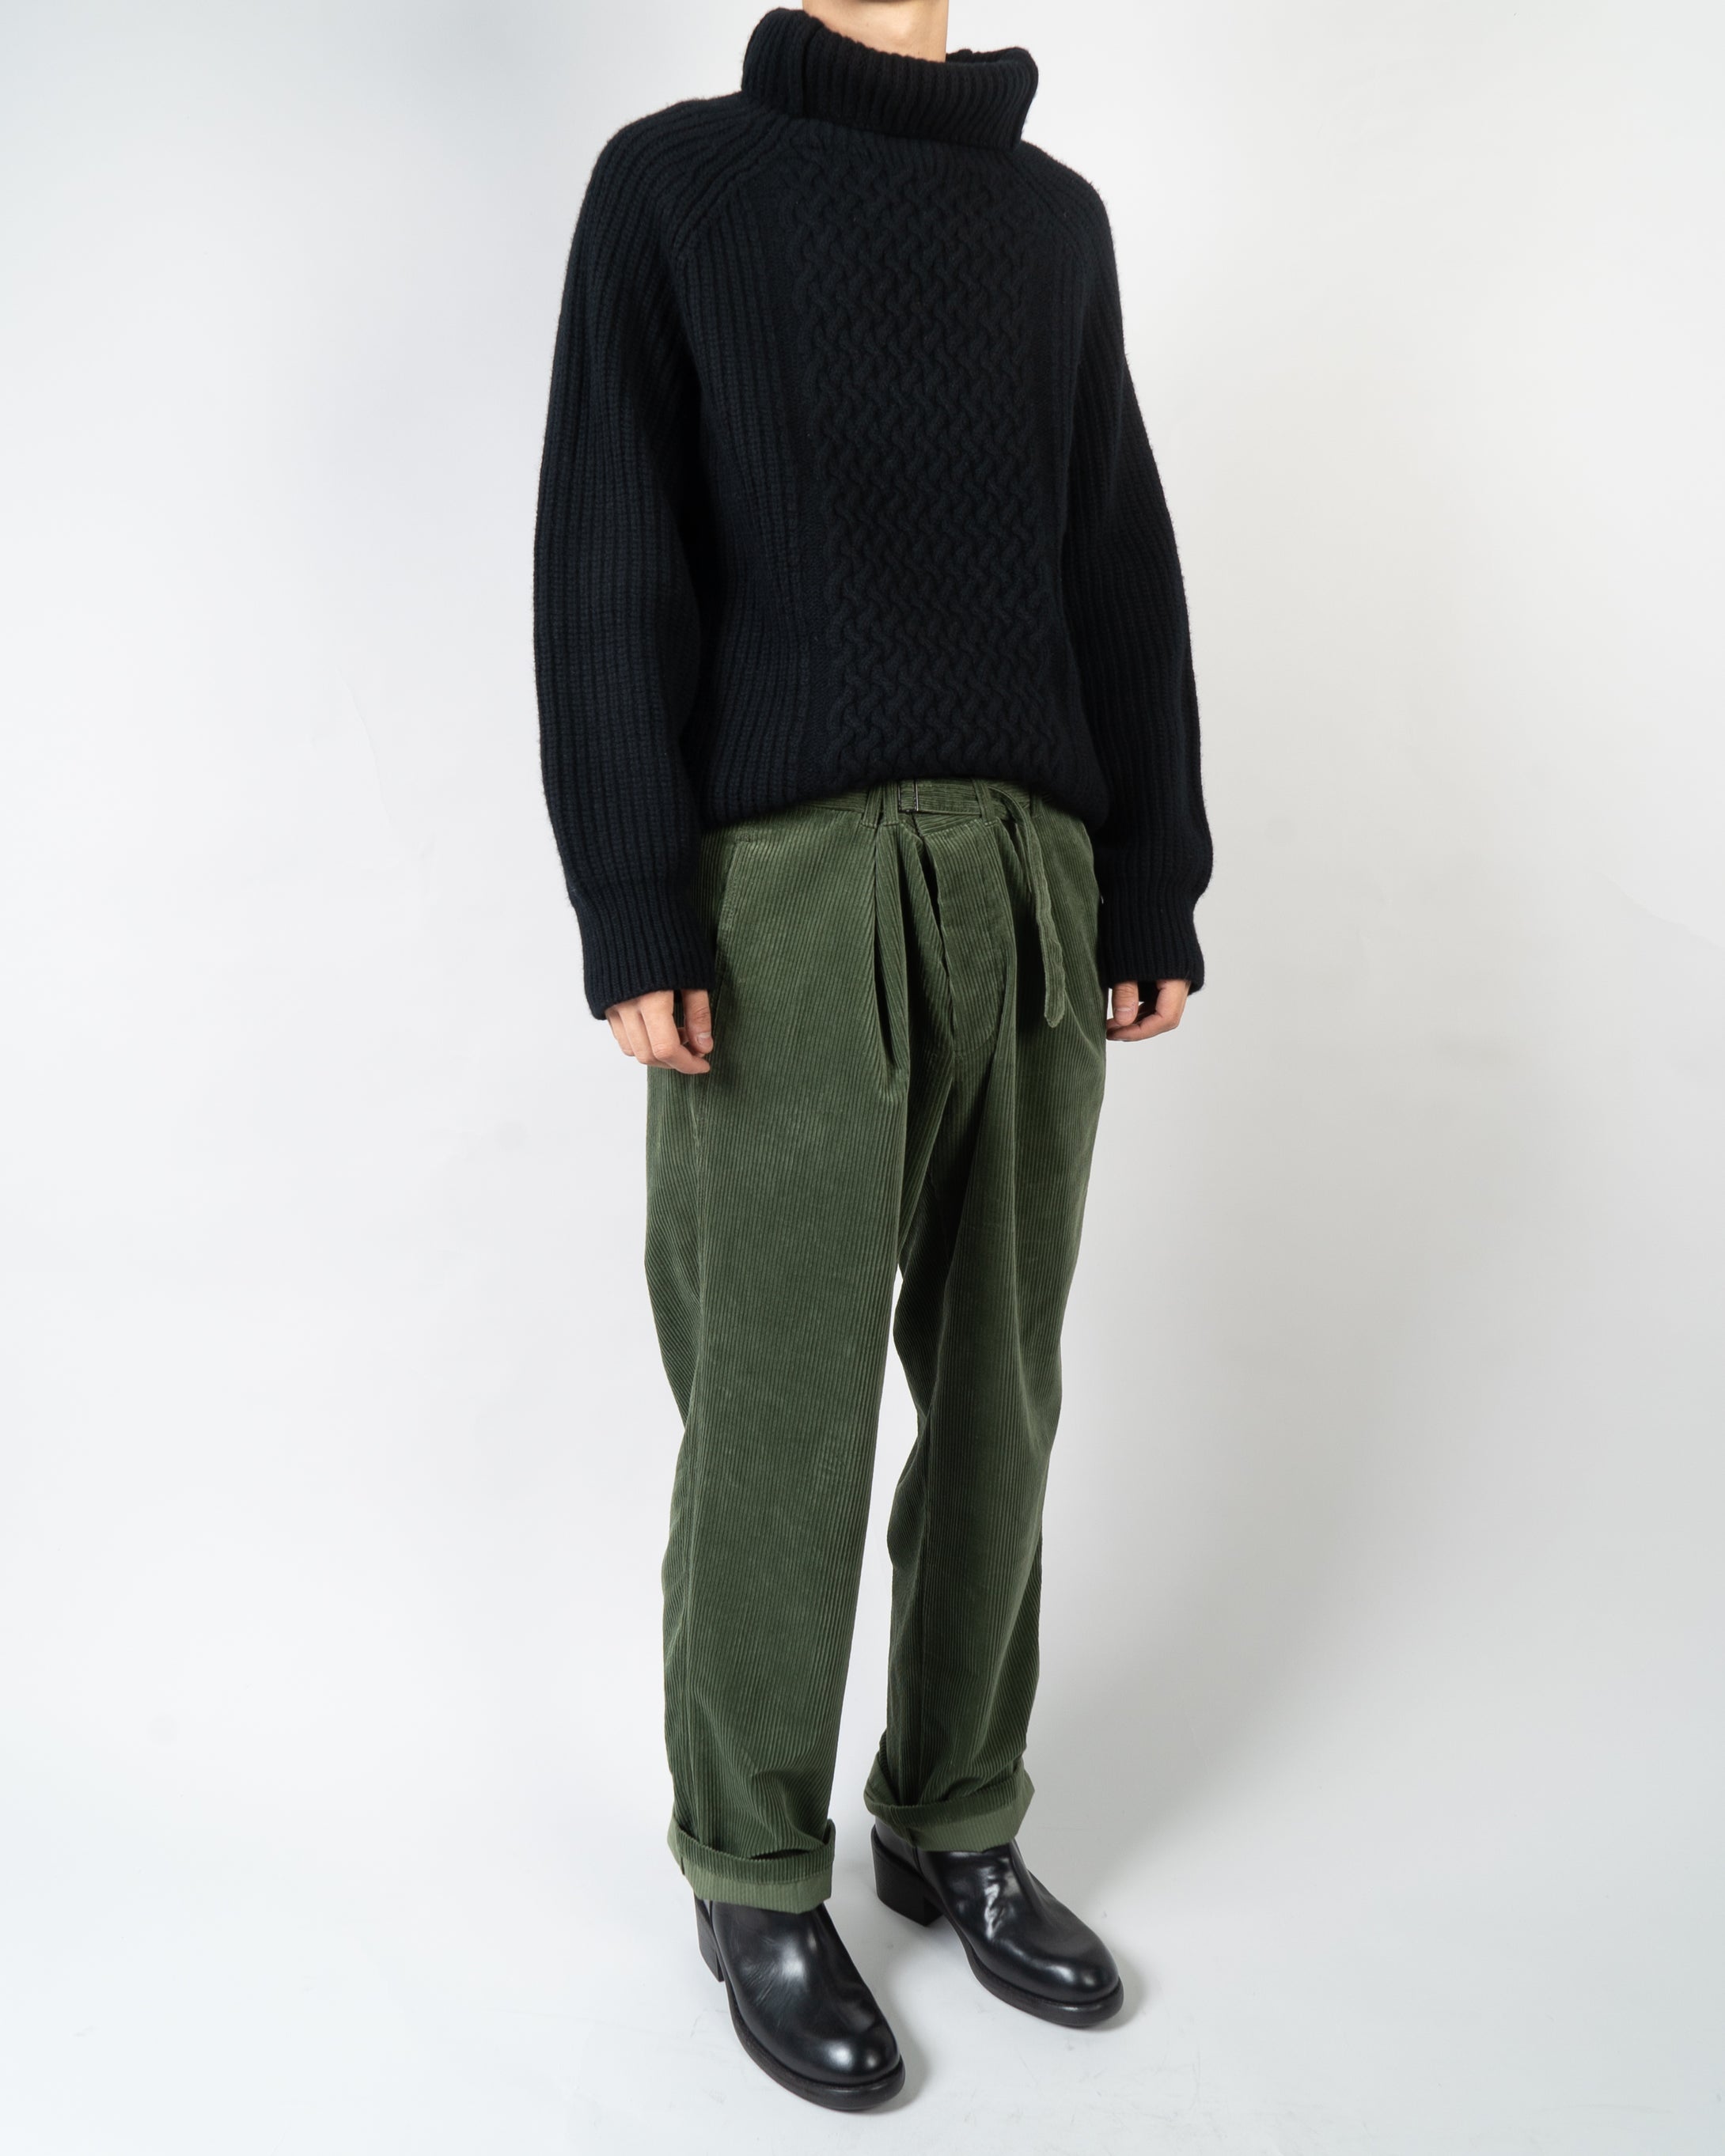 FW20 Black Chunky Cable Knit Turtle Neck